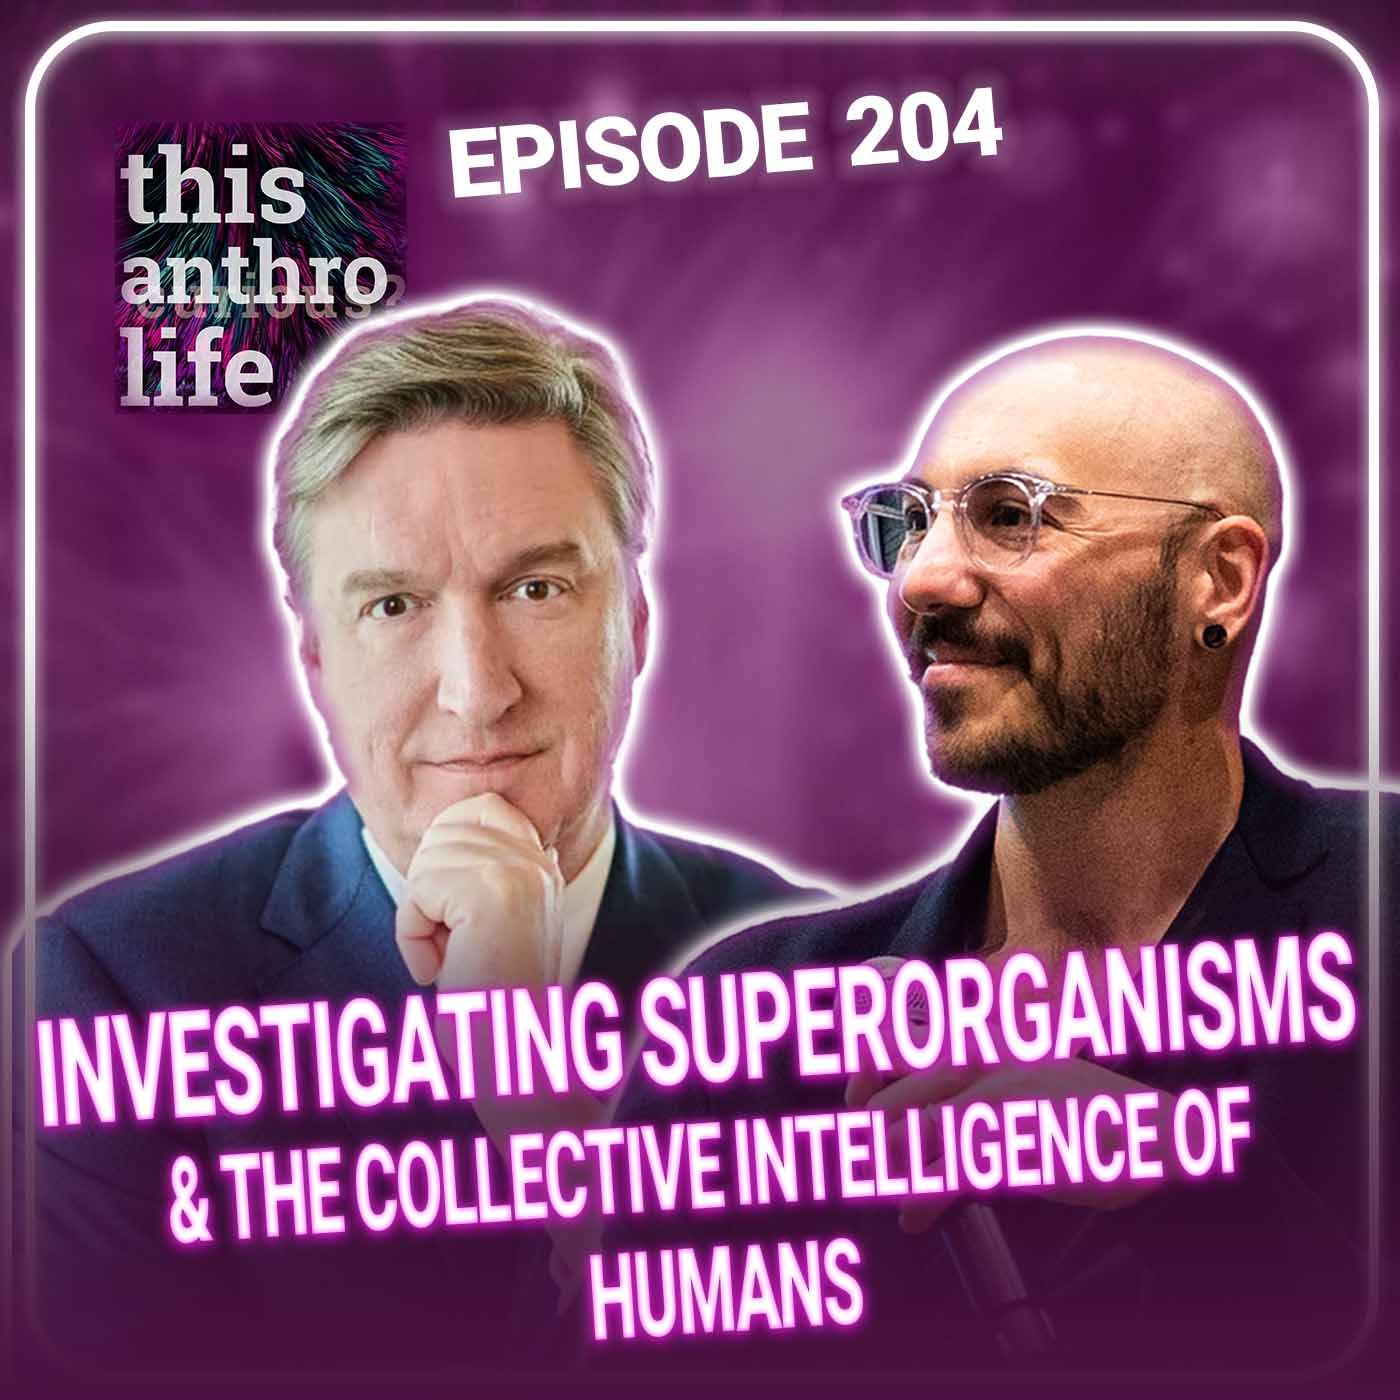 Investigating Superorganisms and The Collective Intelligence of Humans